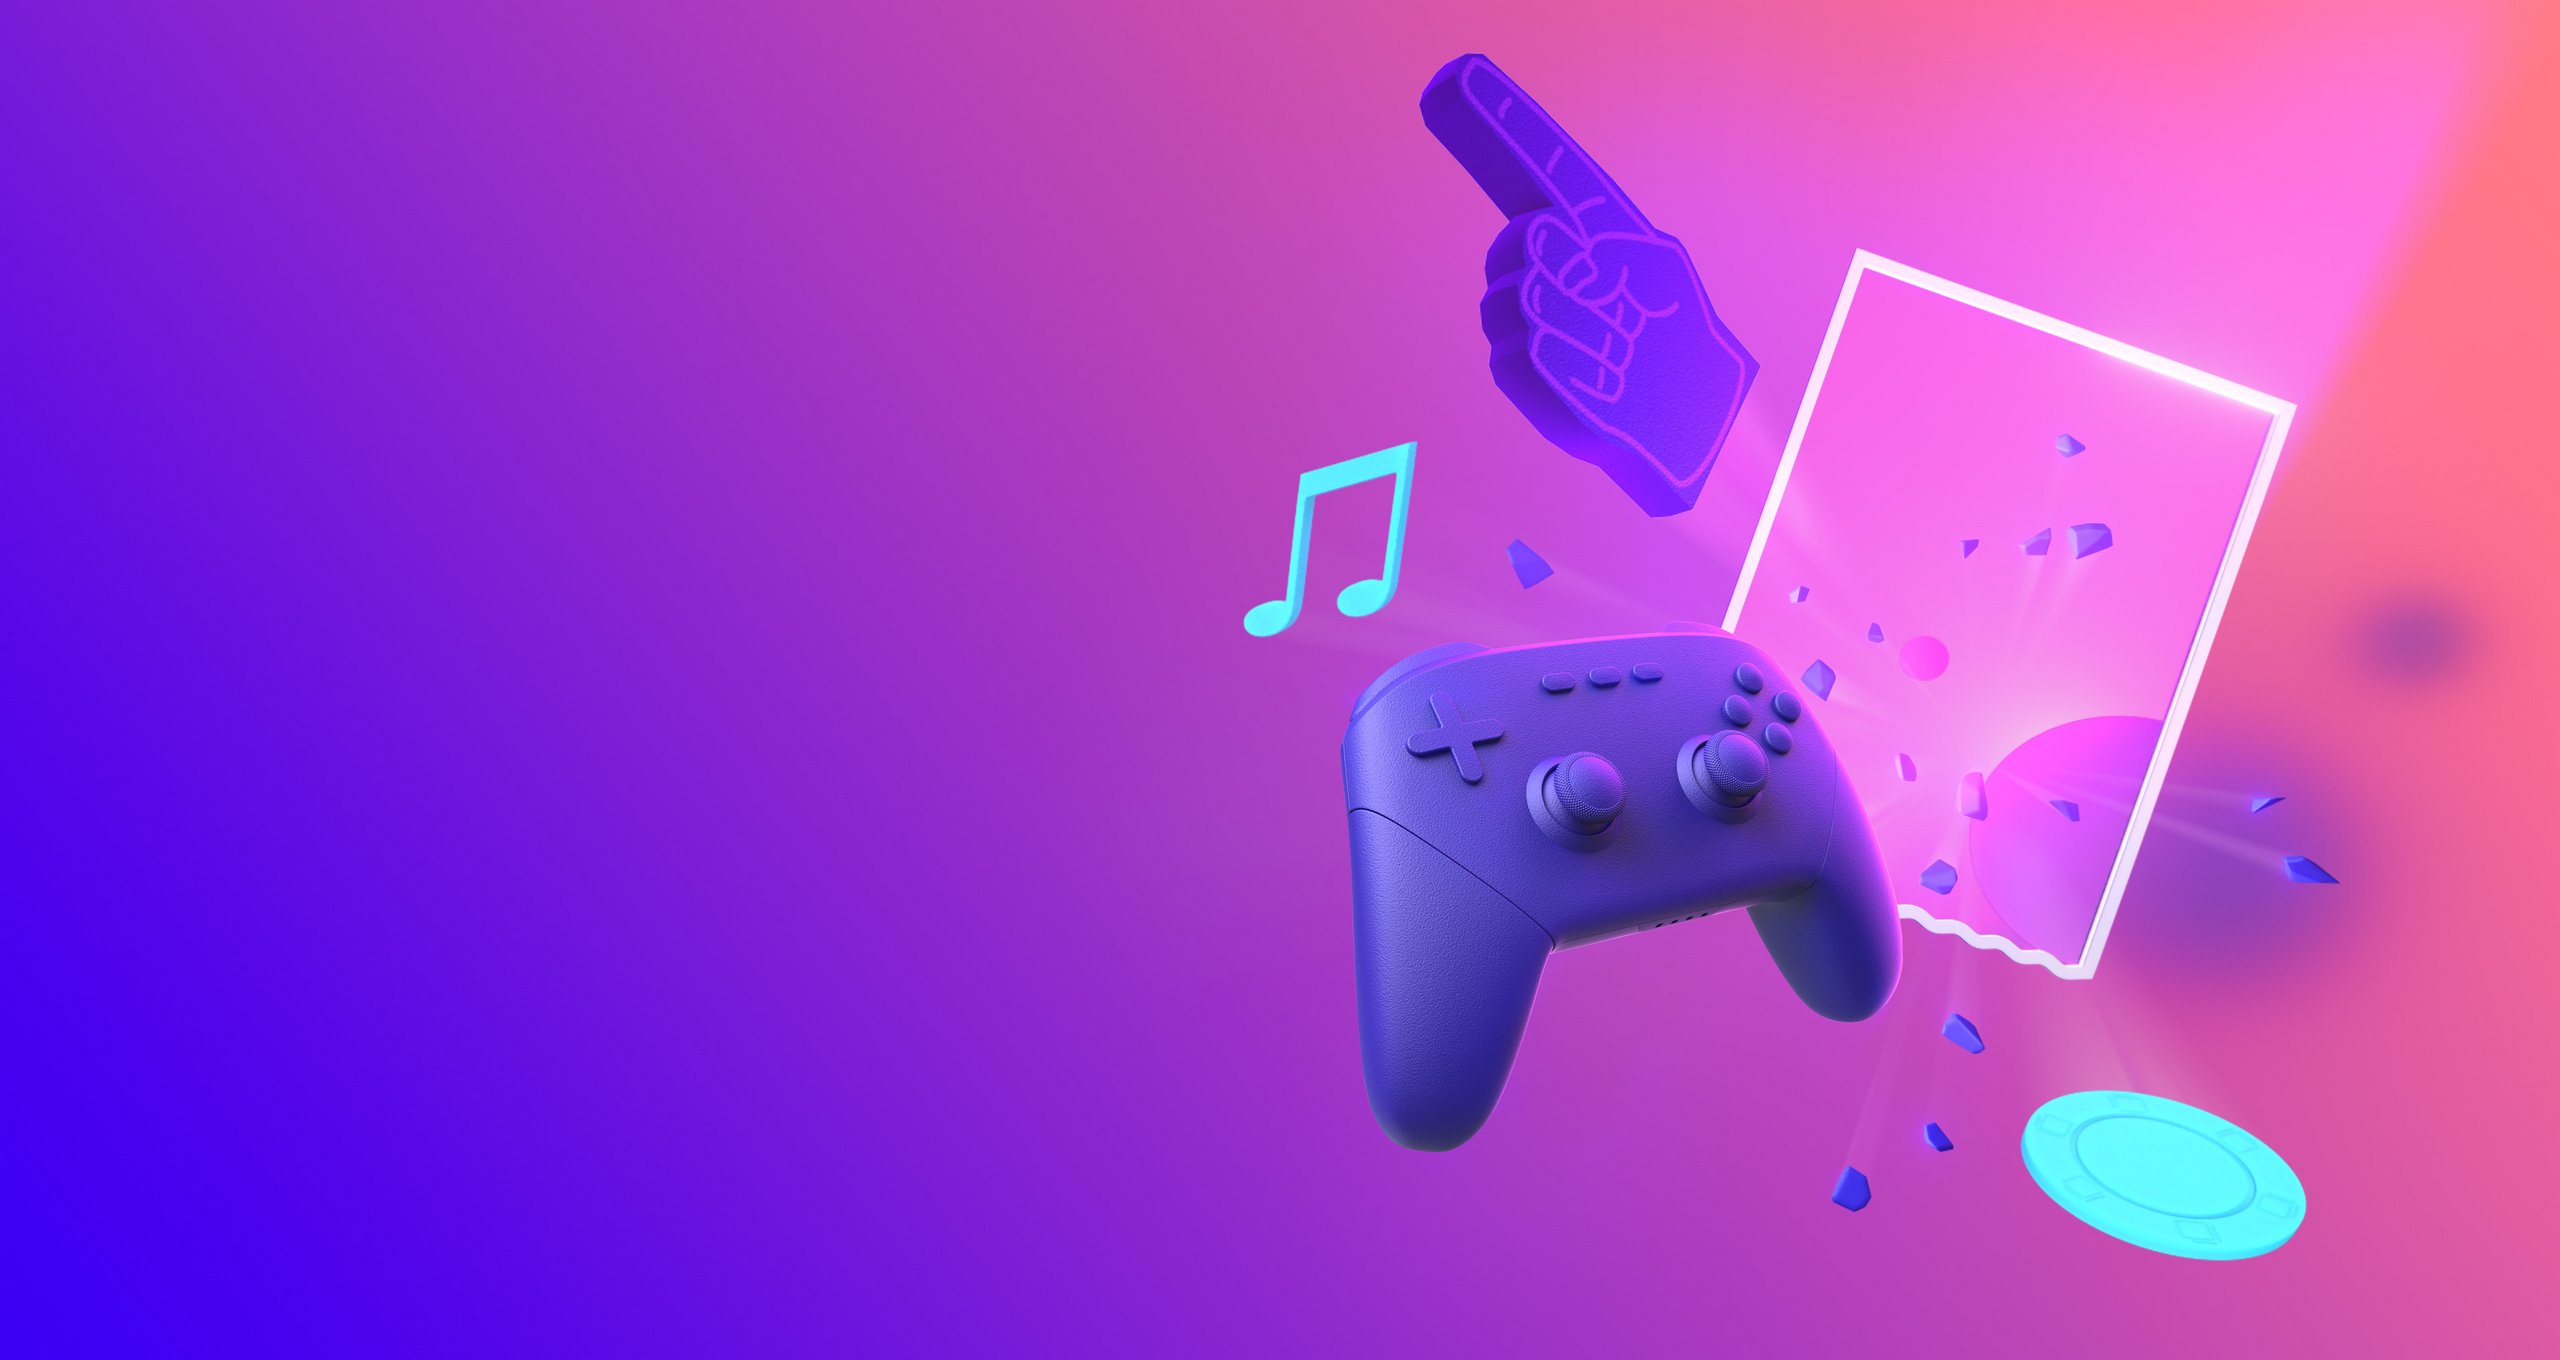 Gaming controller, music note, poker chip and cheer glove on the purple background